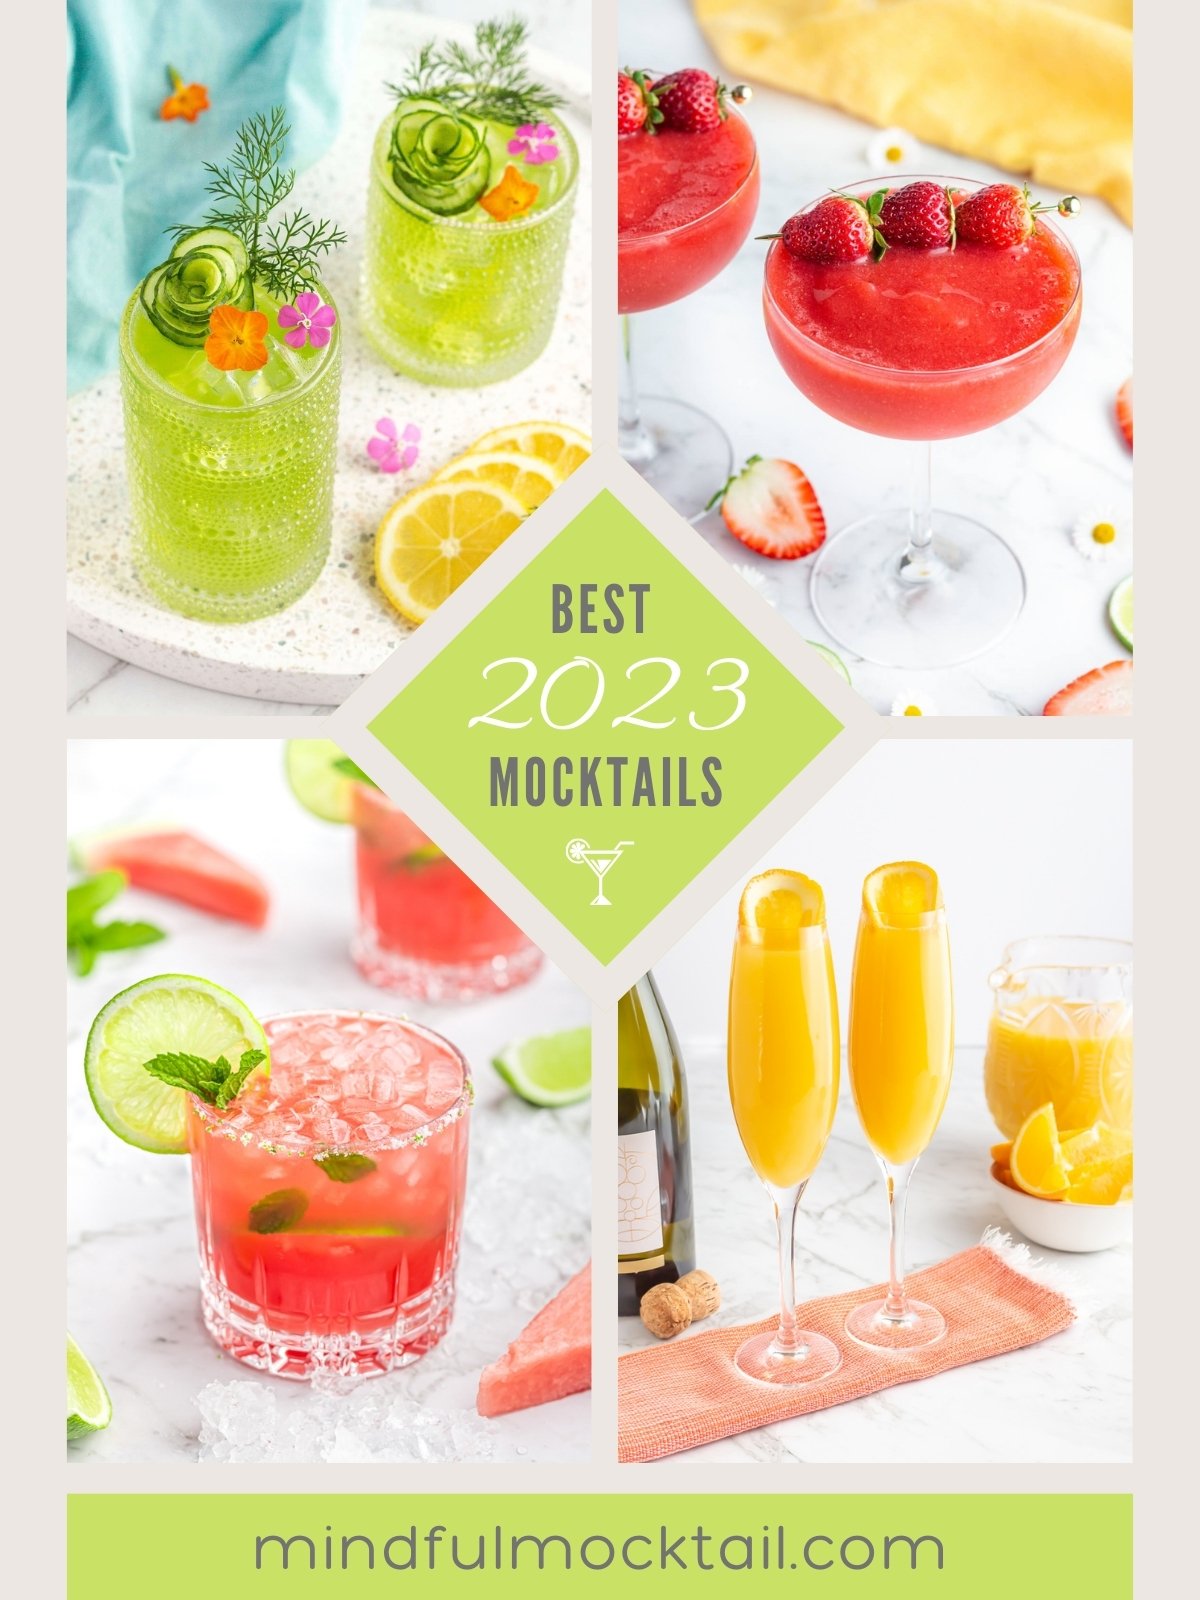 collage of four different mocktails recipes with text Best 2023 Mocktails